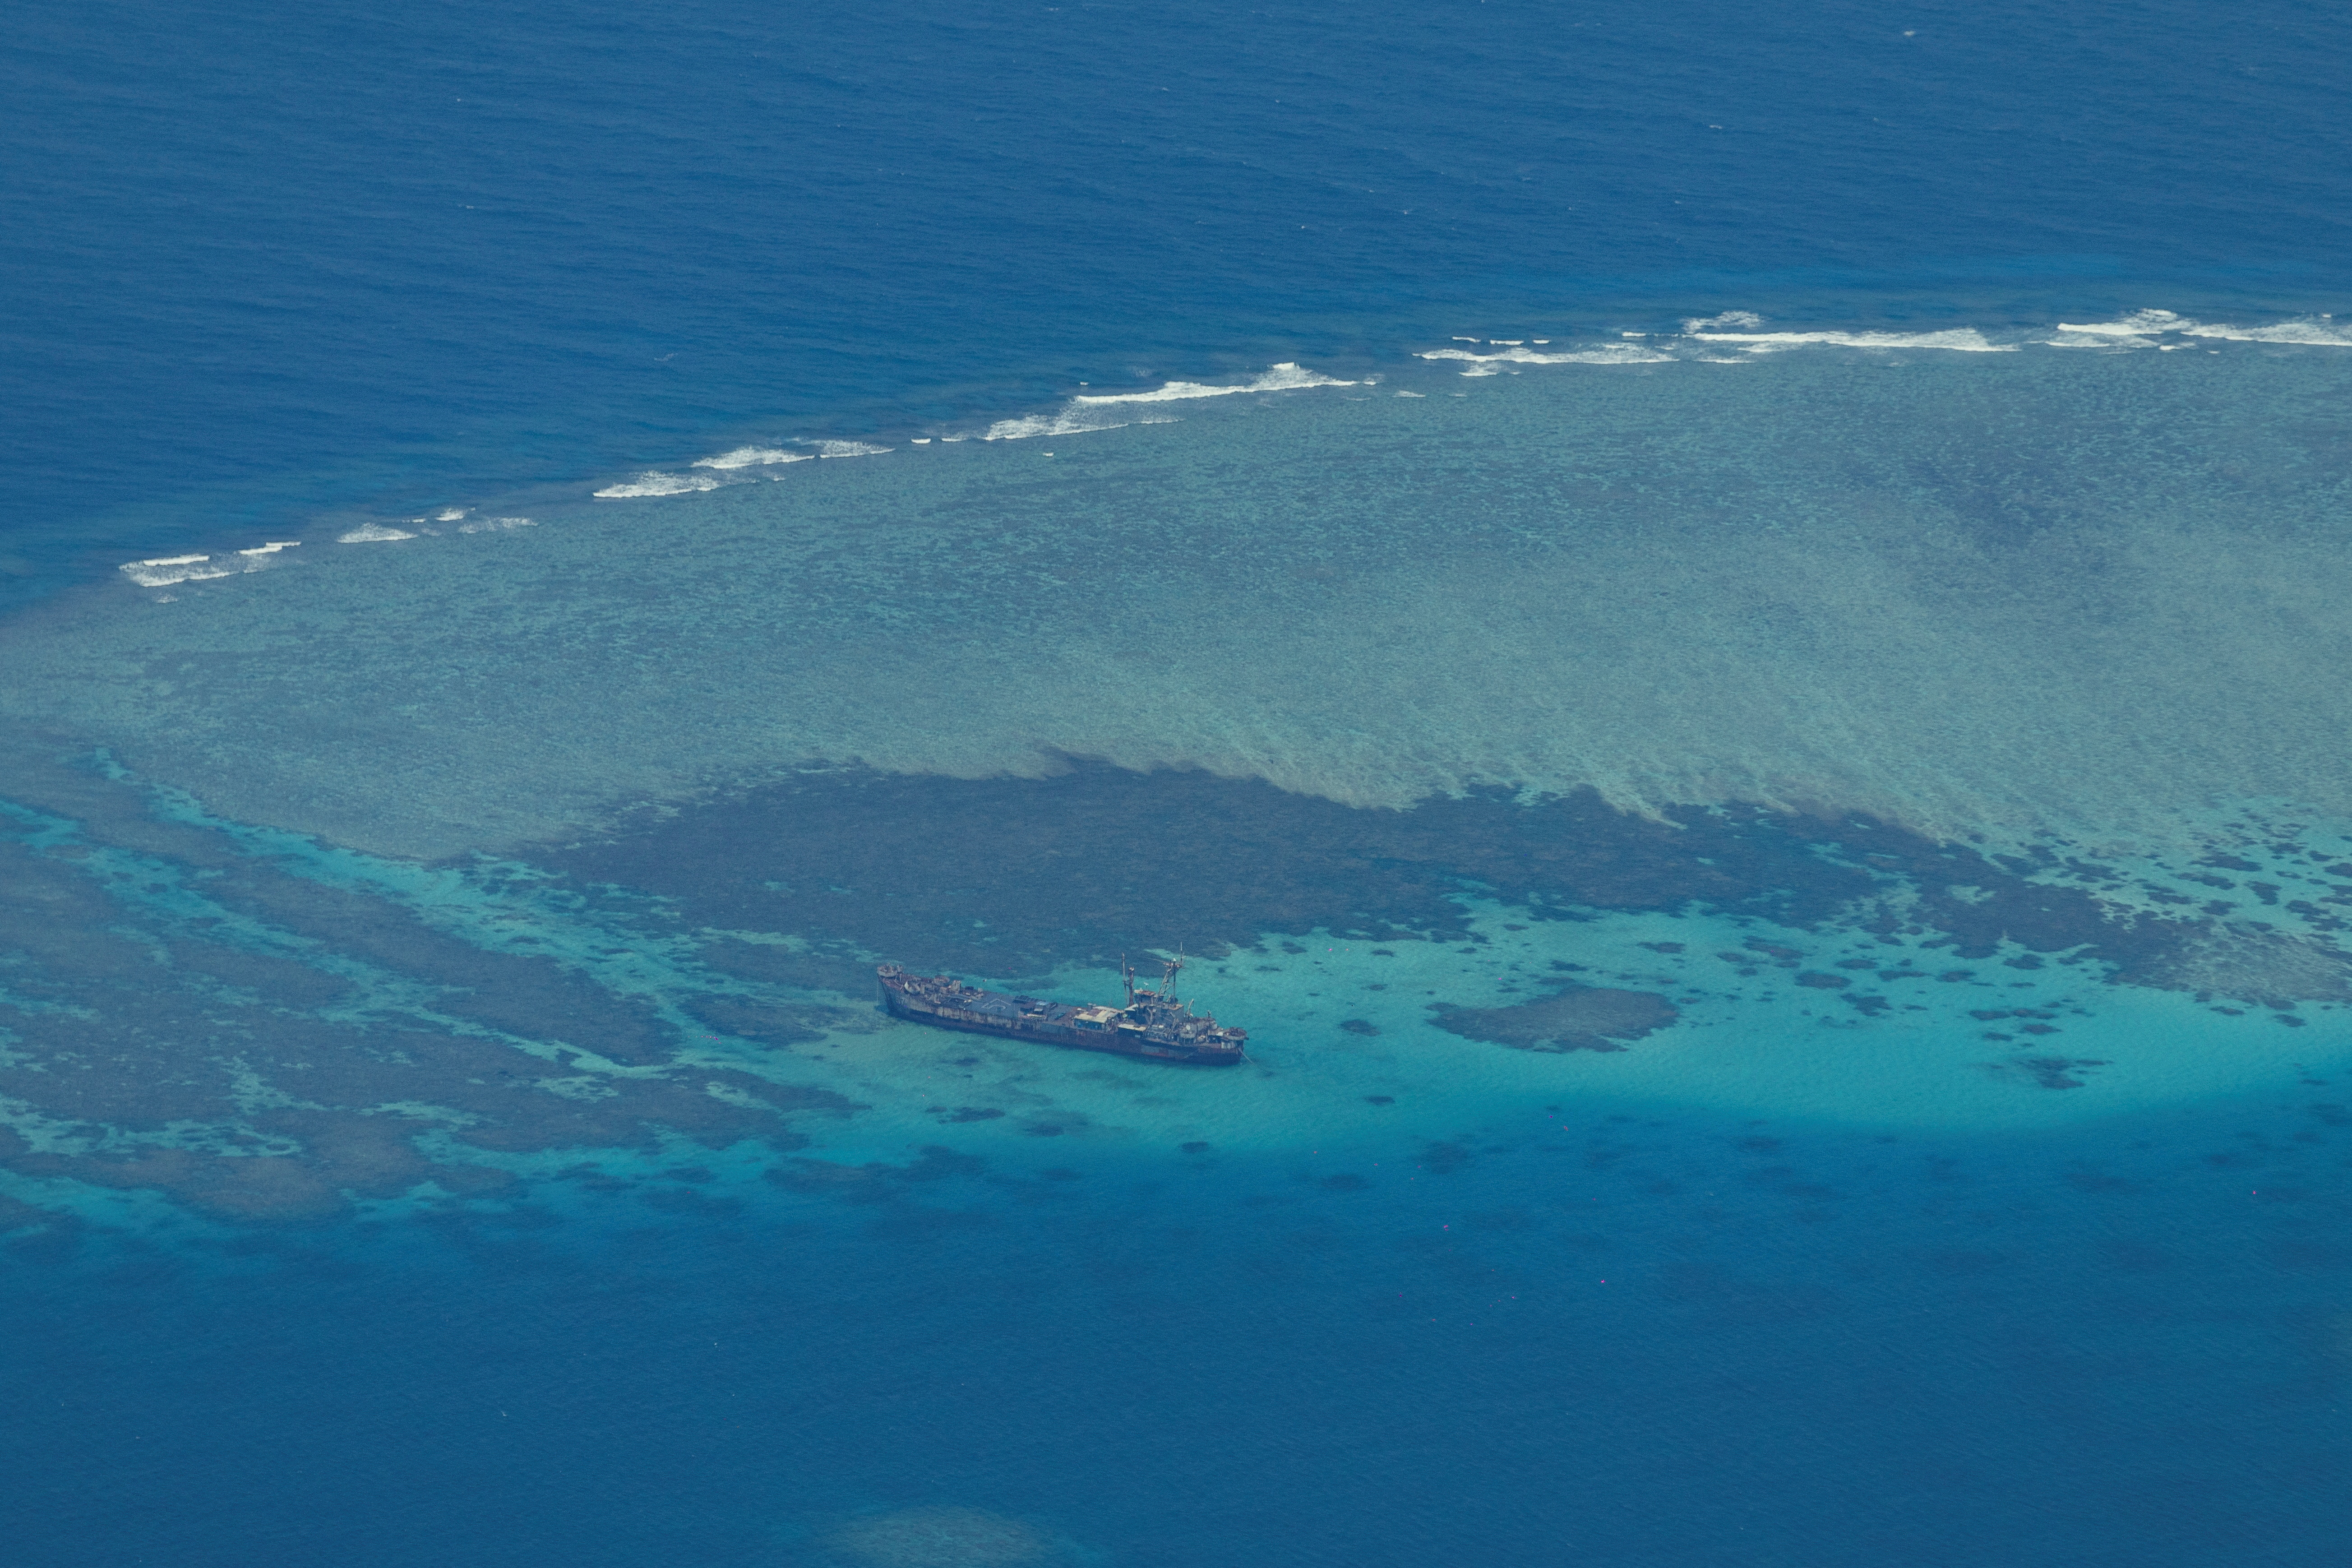 Aerial view of the contested Second Thomas Shoal in the South China Sea